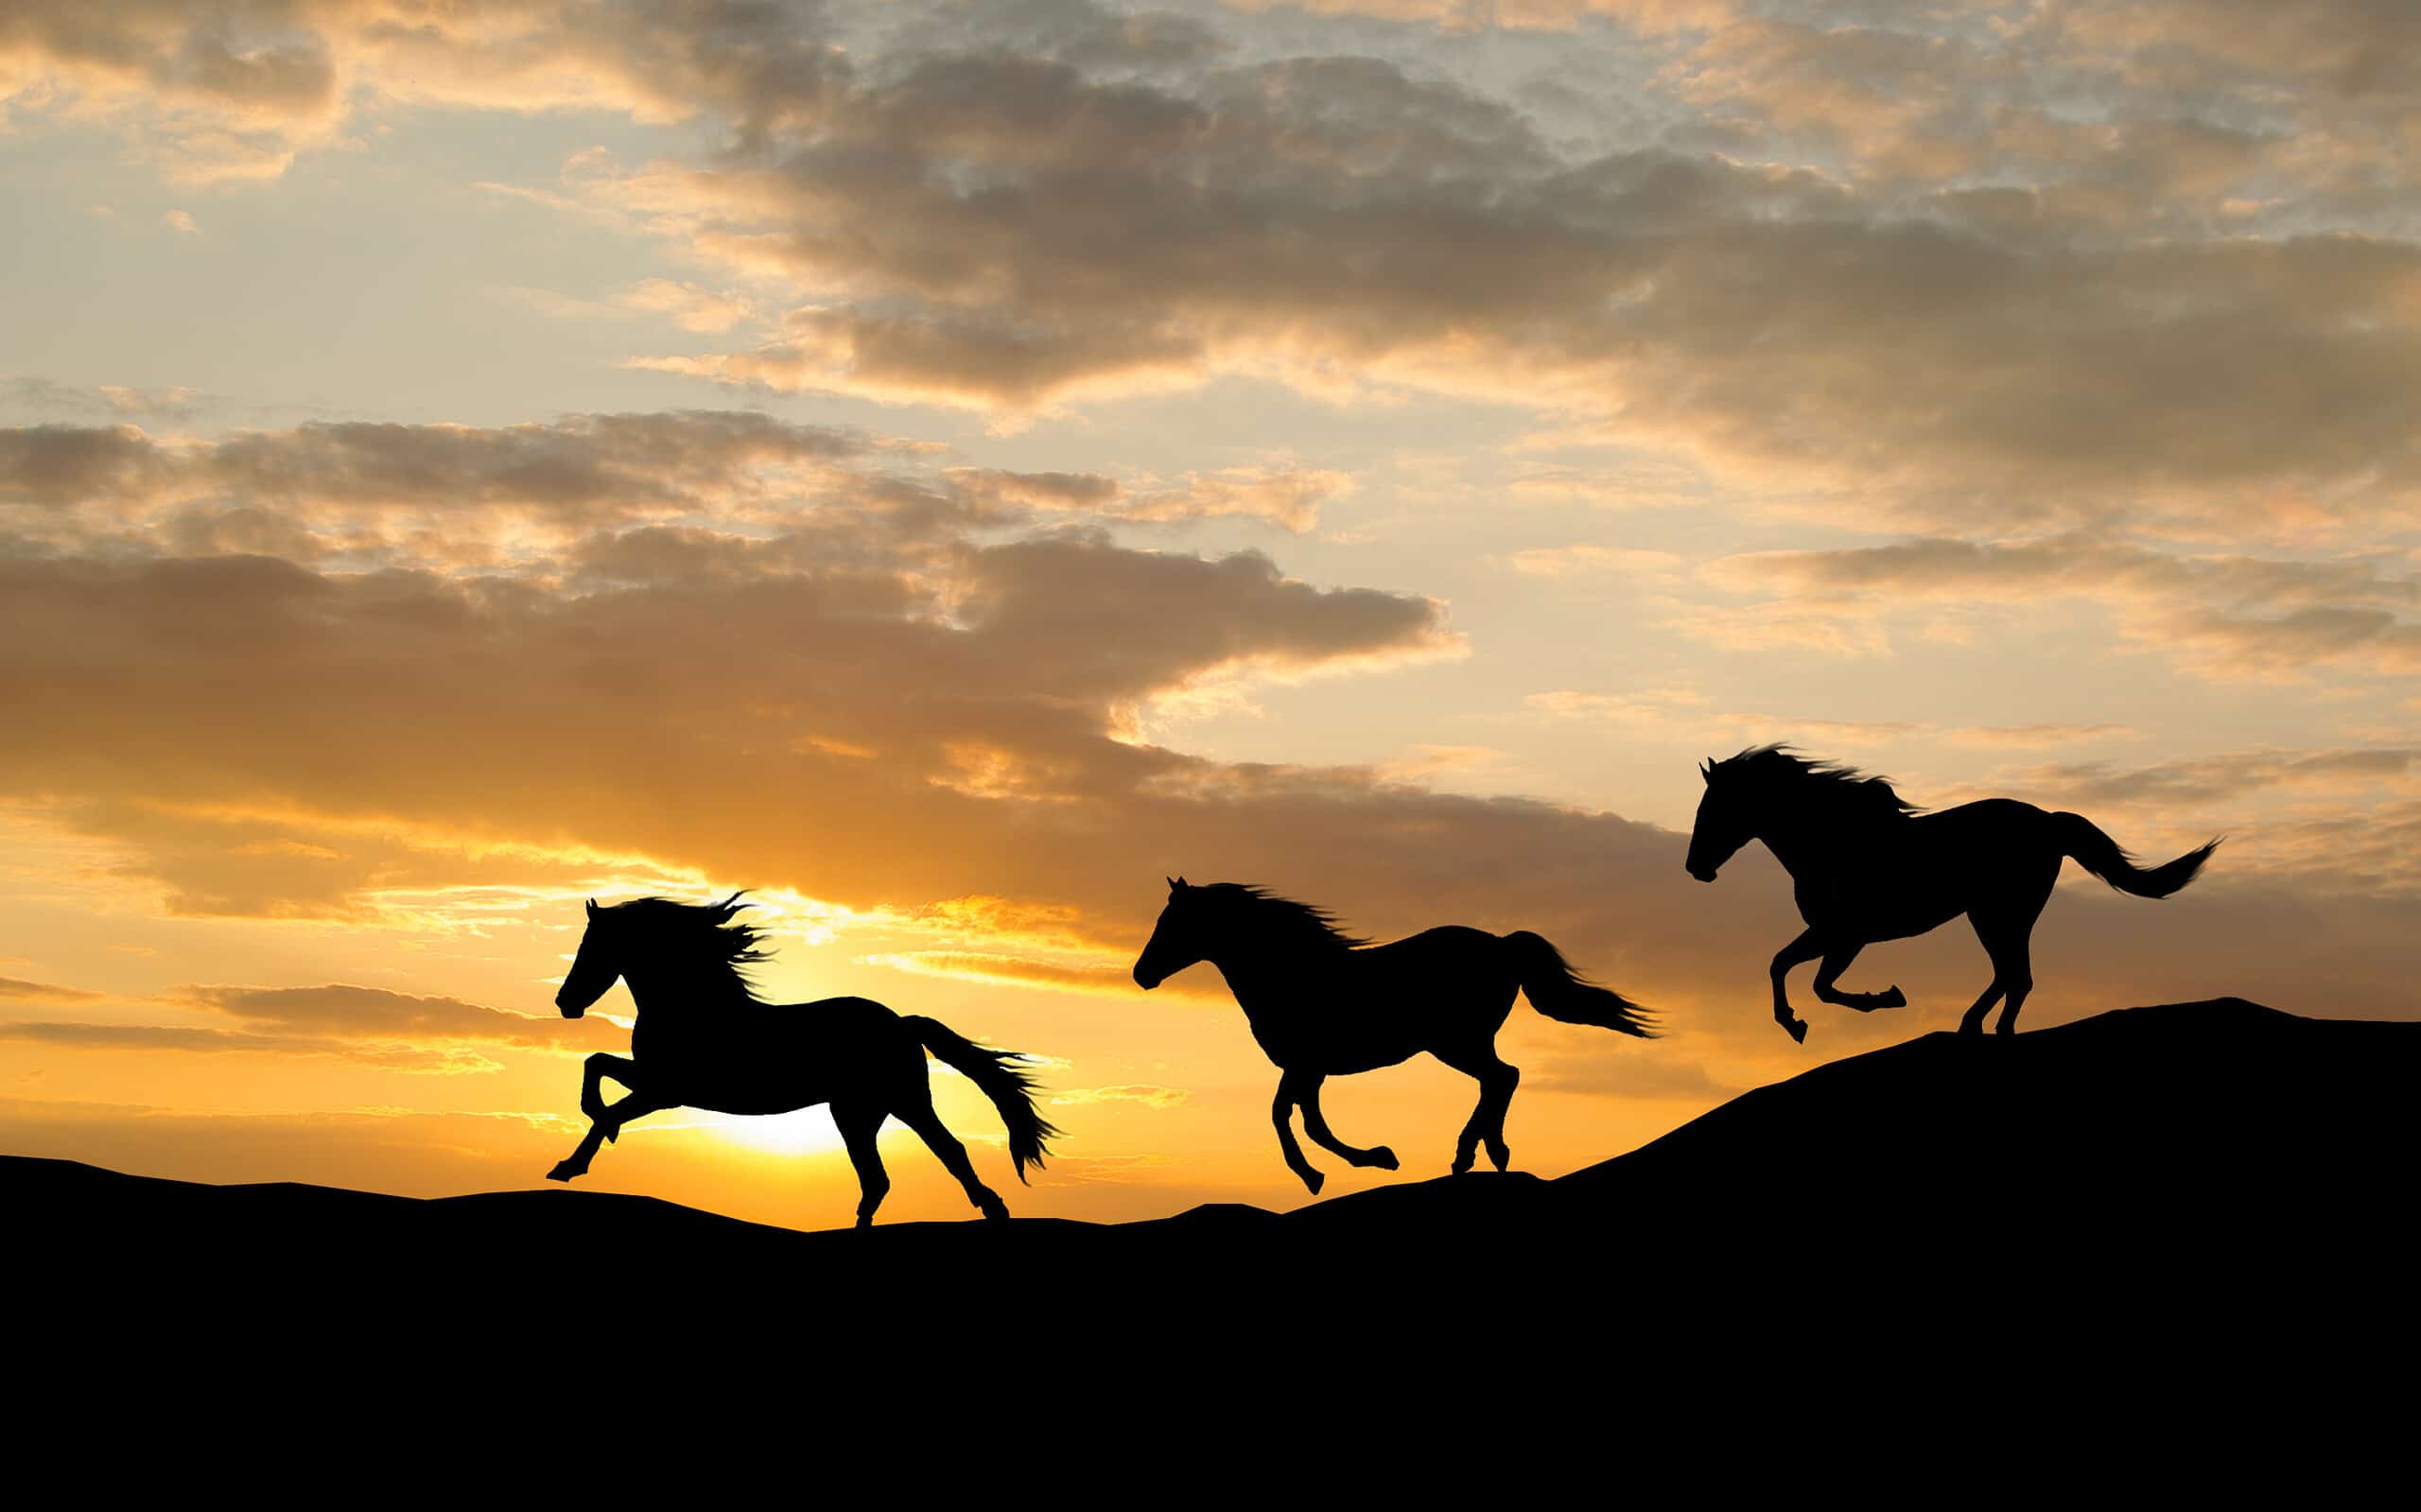 Silhouette of three wild horses galloping by colorful sunset